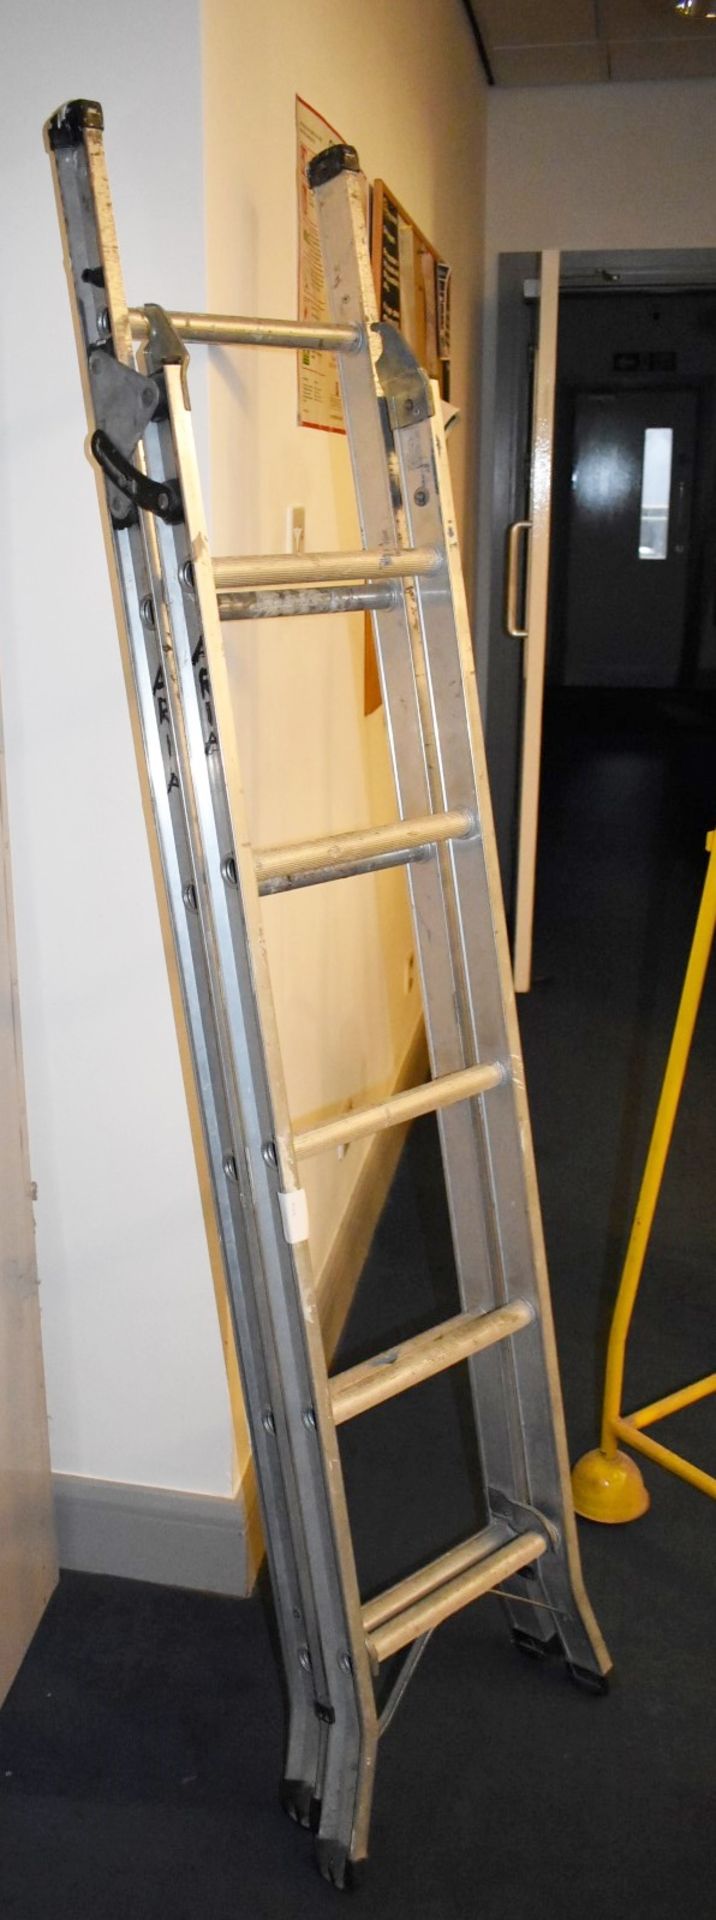 1 x Abru 3 Way Combination Stair Ladder - Image 2 of 7